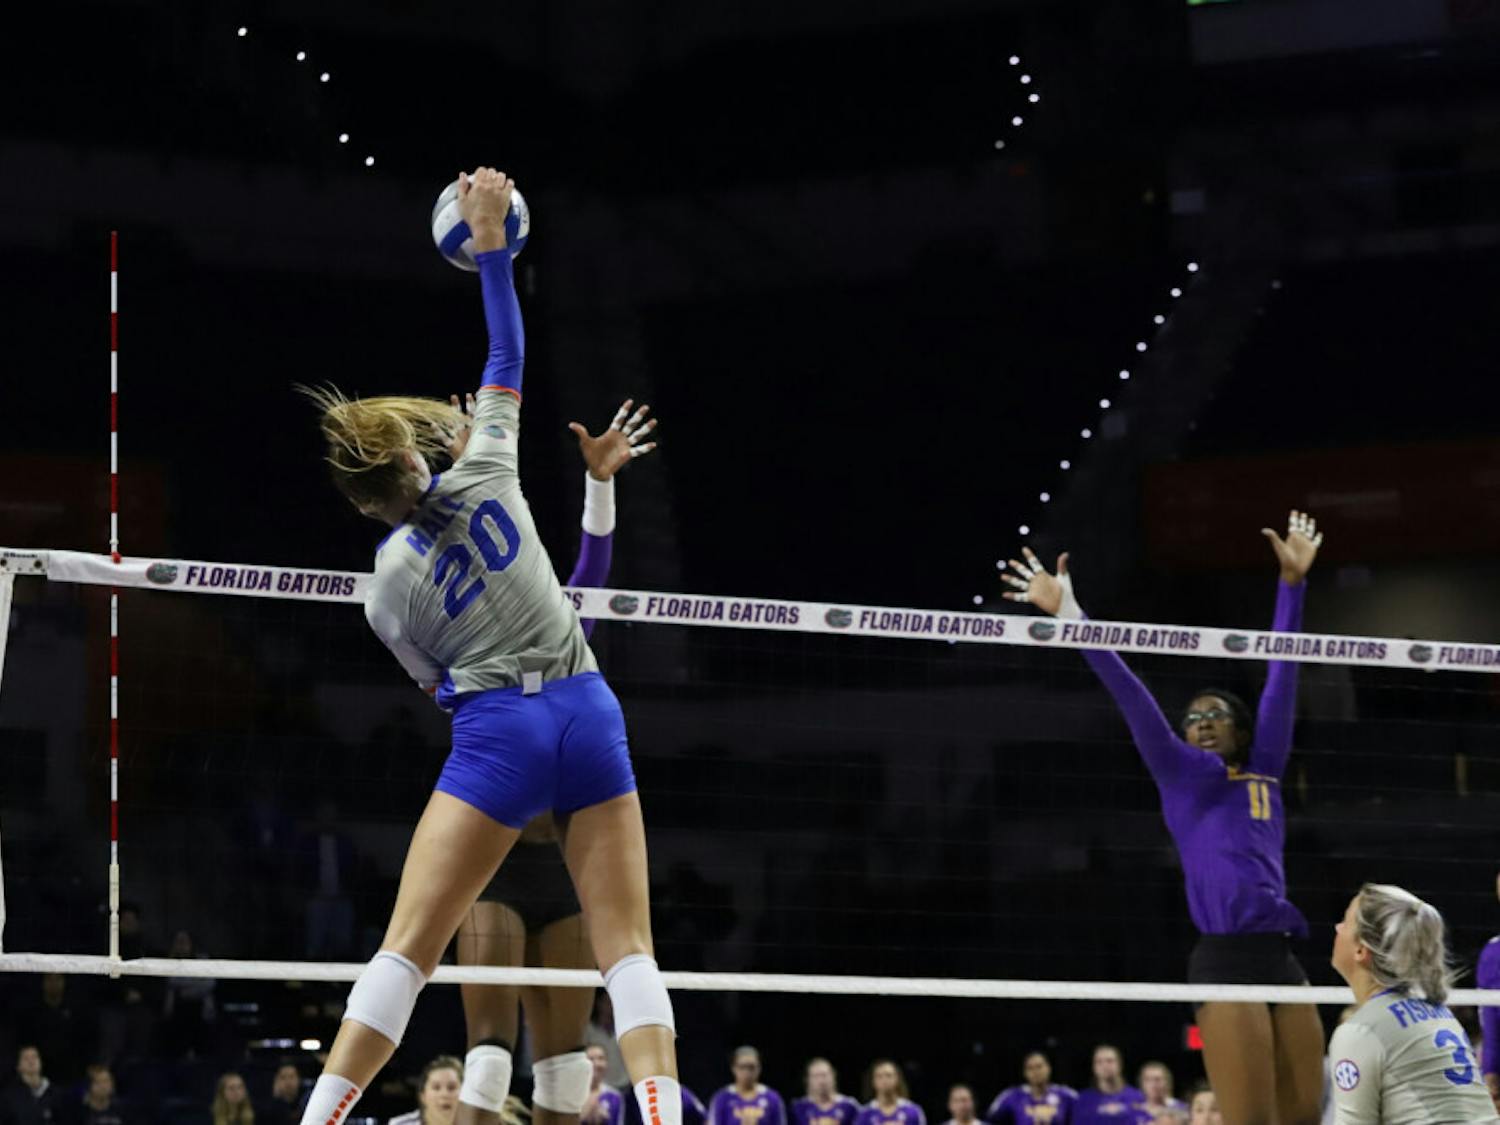 Florida&#x27;s Thayer Hall spikes a ball against LSU in 2019. Hall recorded 13 kills in a 3-1 loss to No. 17 Baylor Friday night.